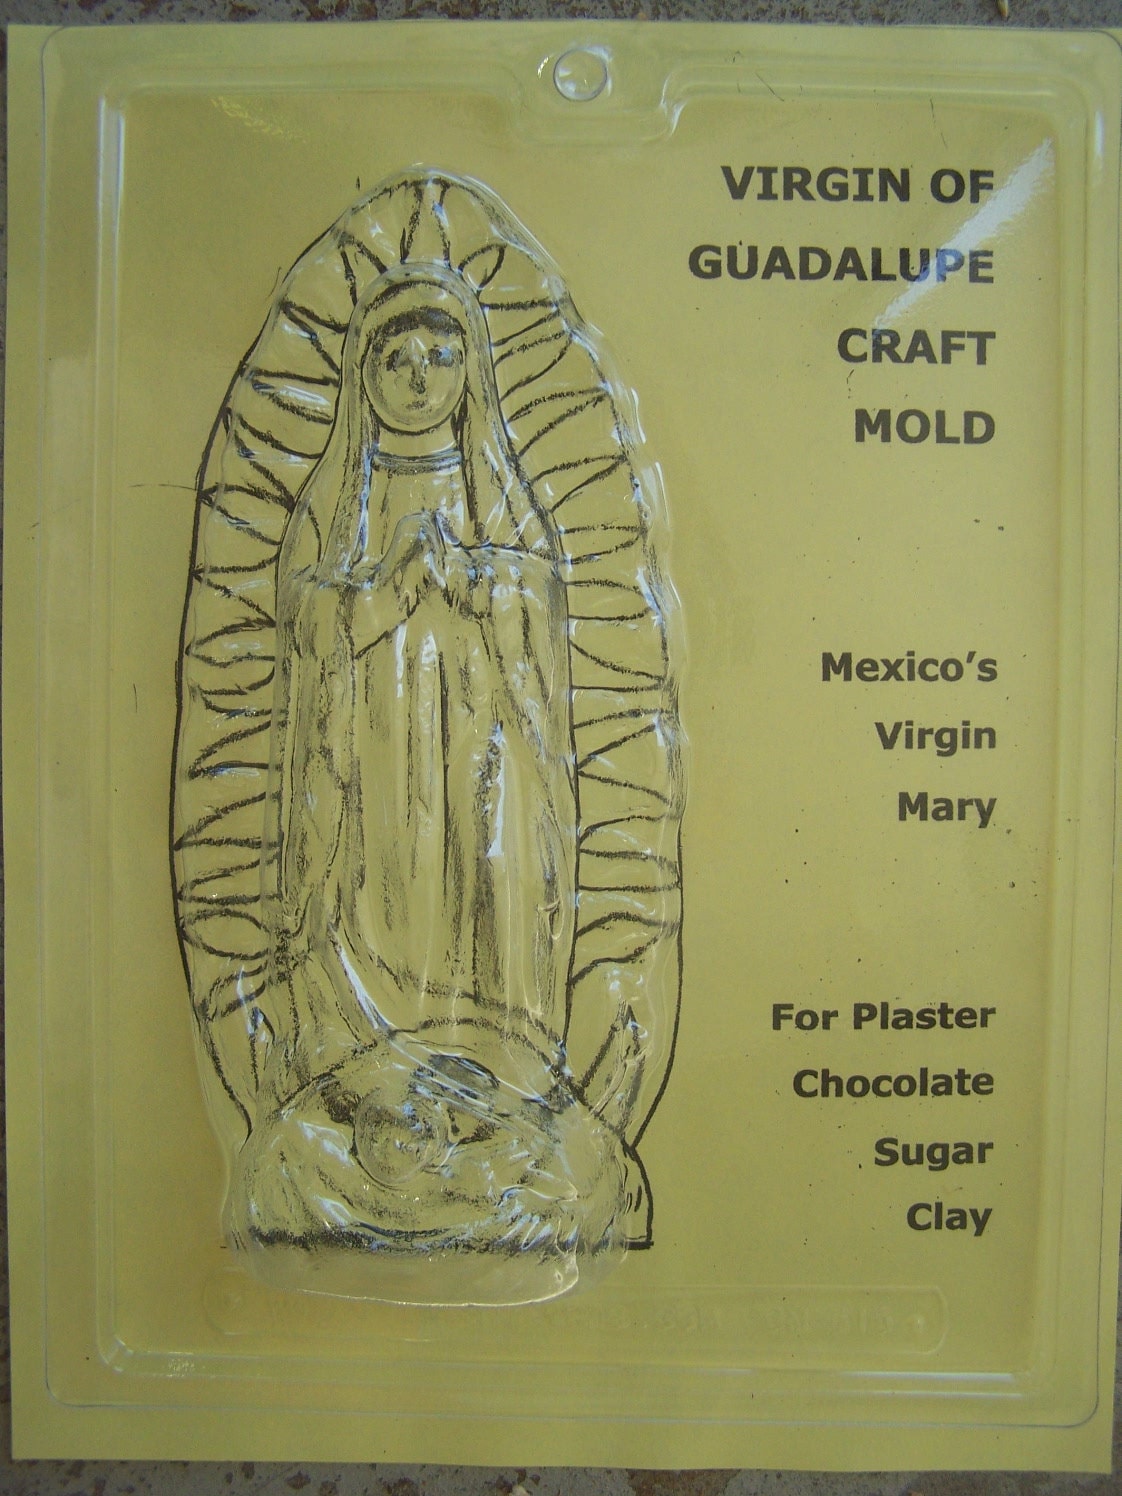 Virgin of Guadalupe Plastic Mold for Clay, Papier-Mache, Plaster, Sugar, Chocolate